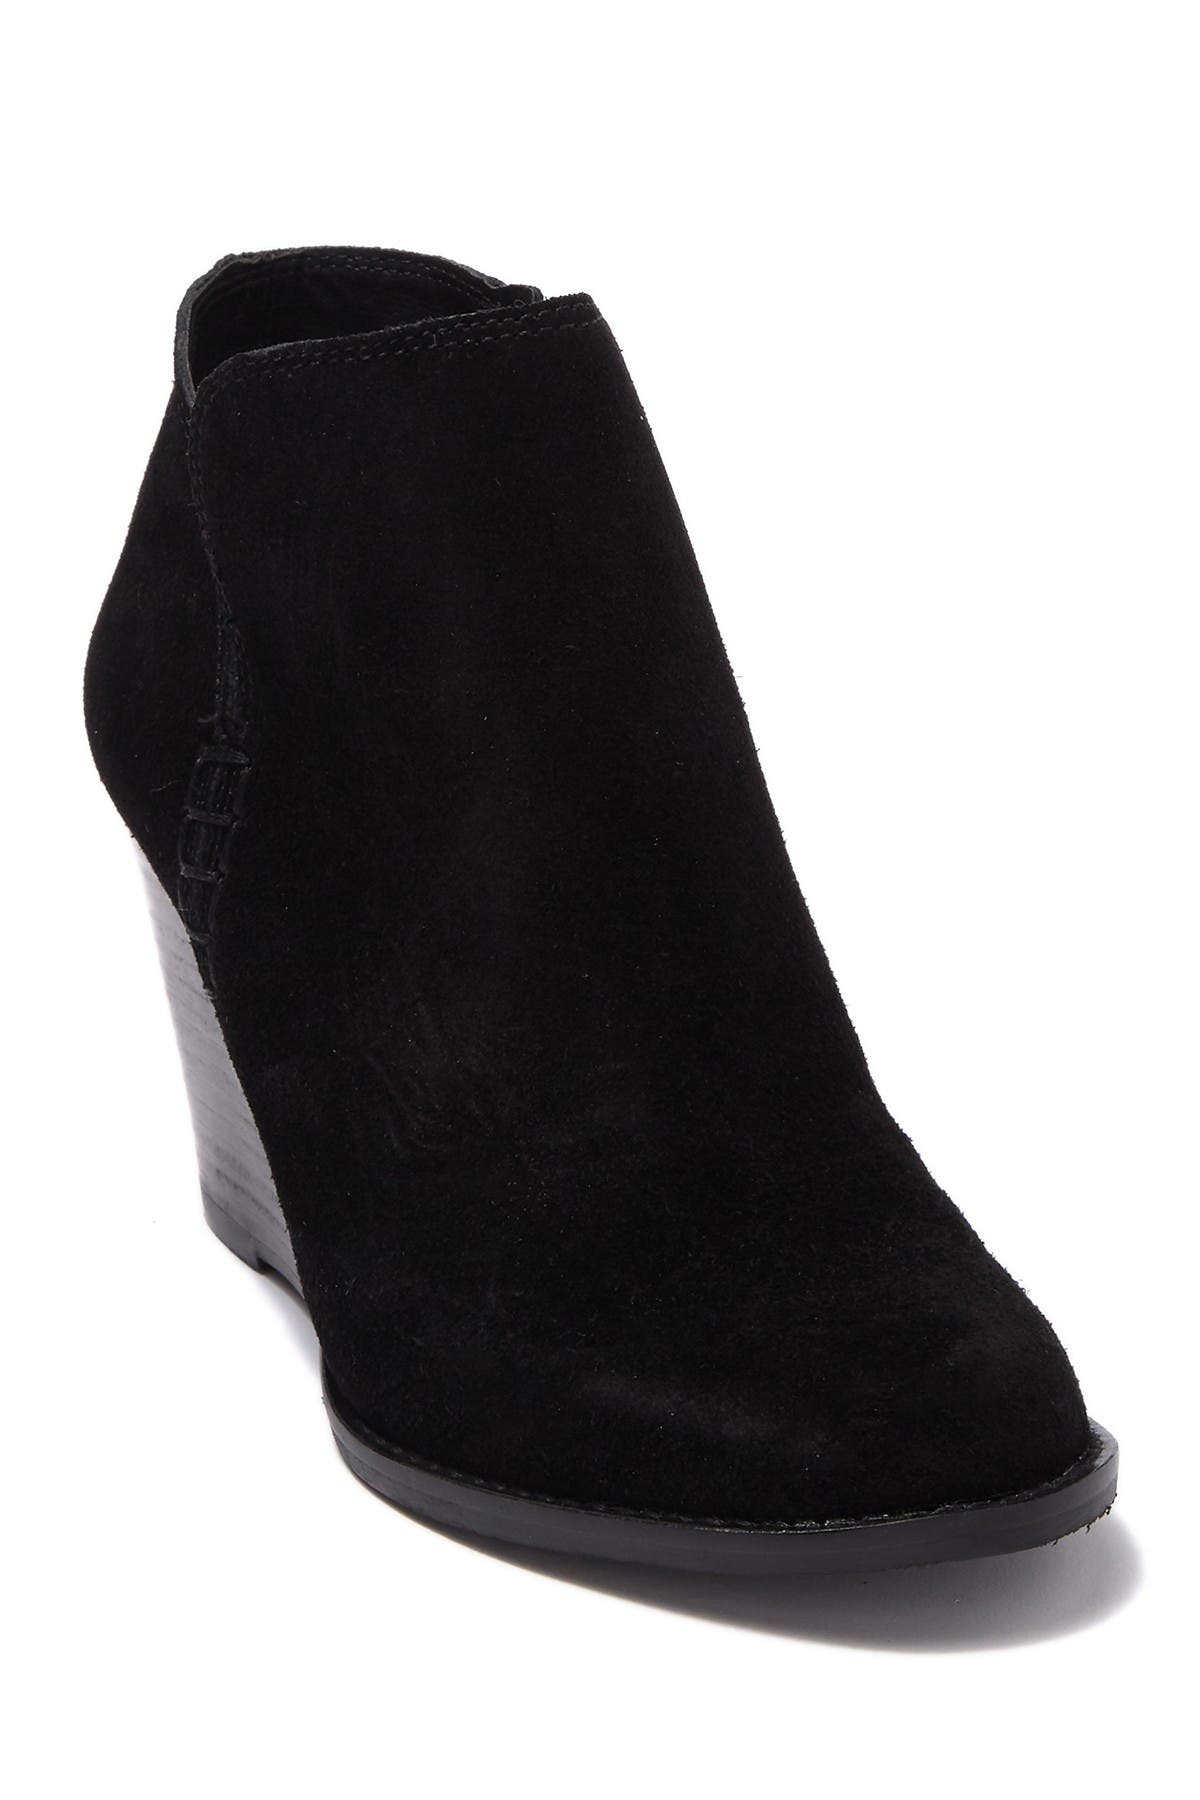 Lucky Brand Yimme Wedge Heel Boot In Black